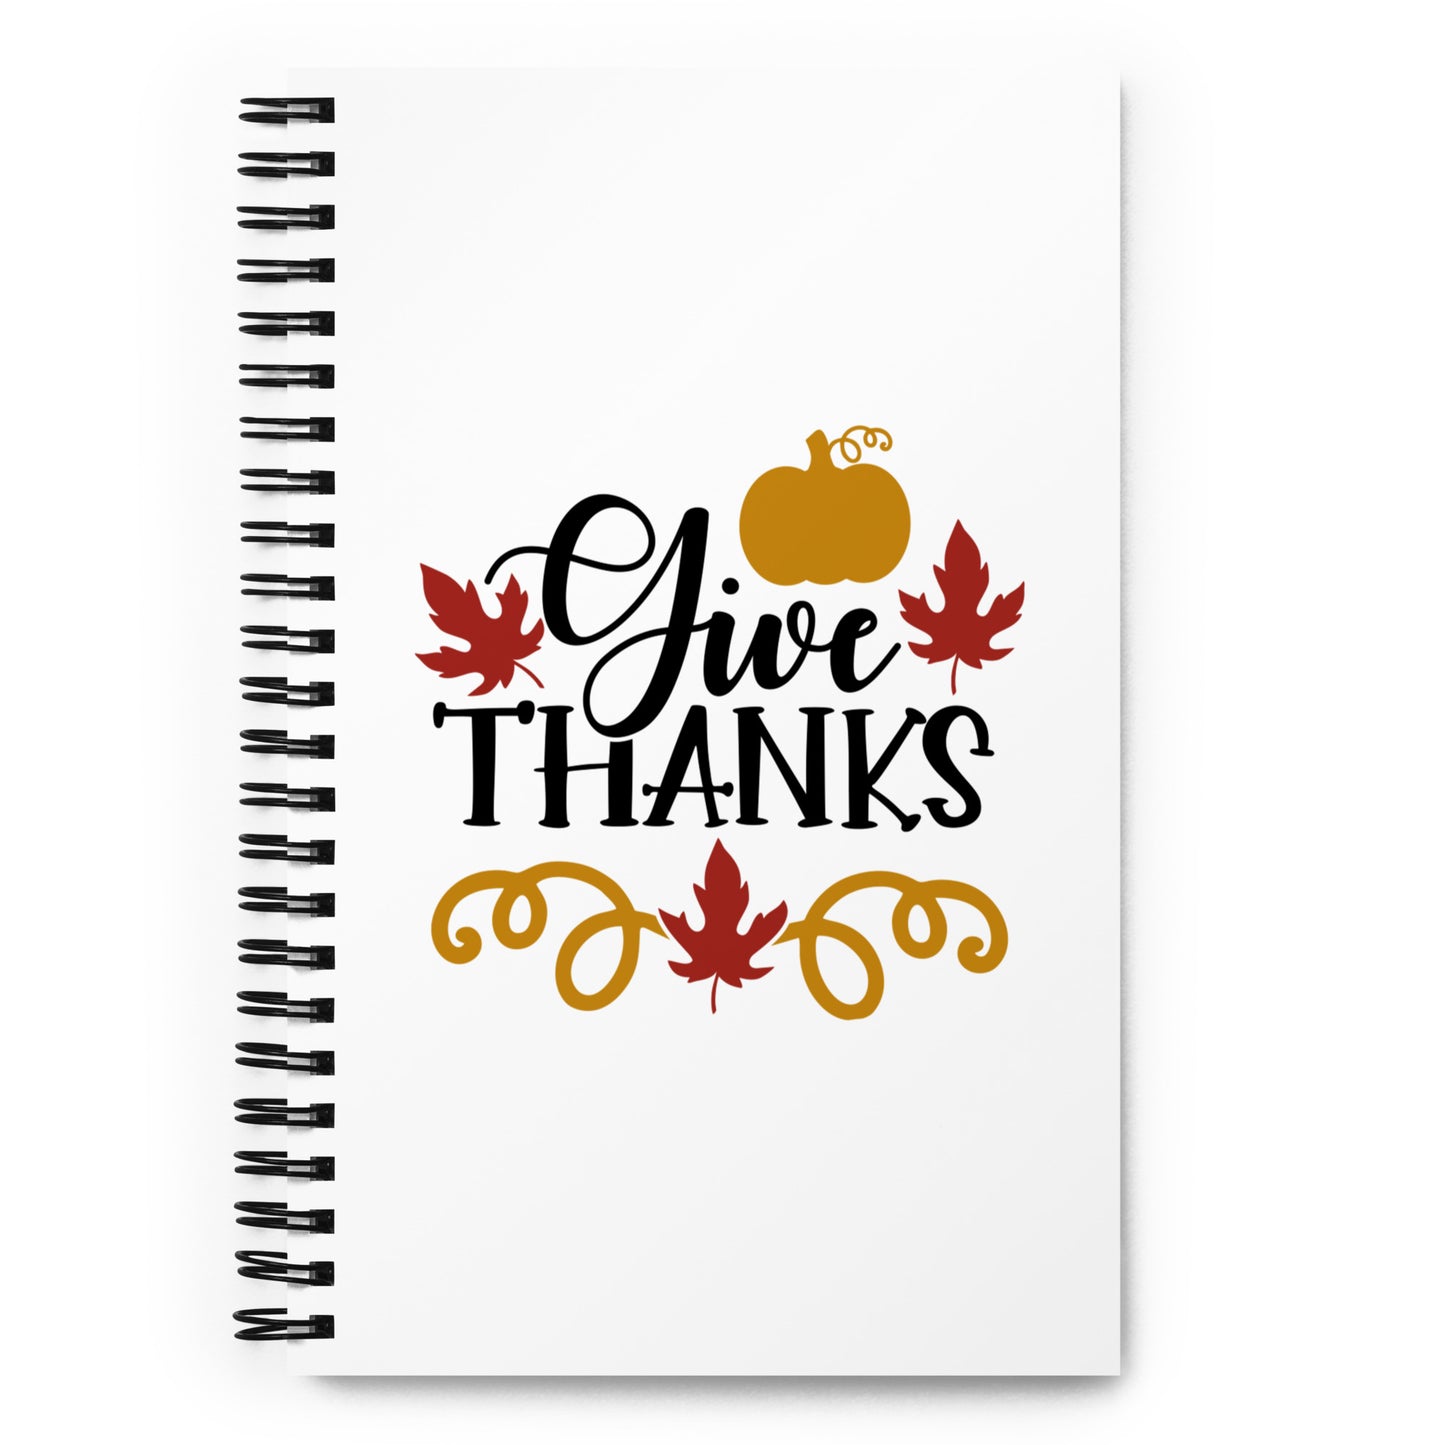 Give Thanks Spiral notebook